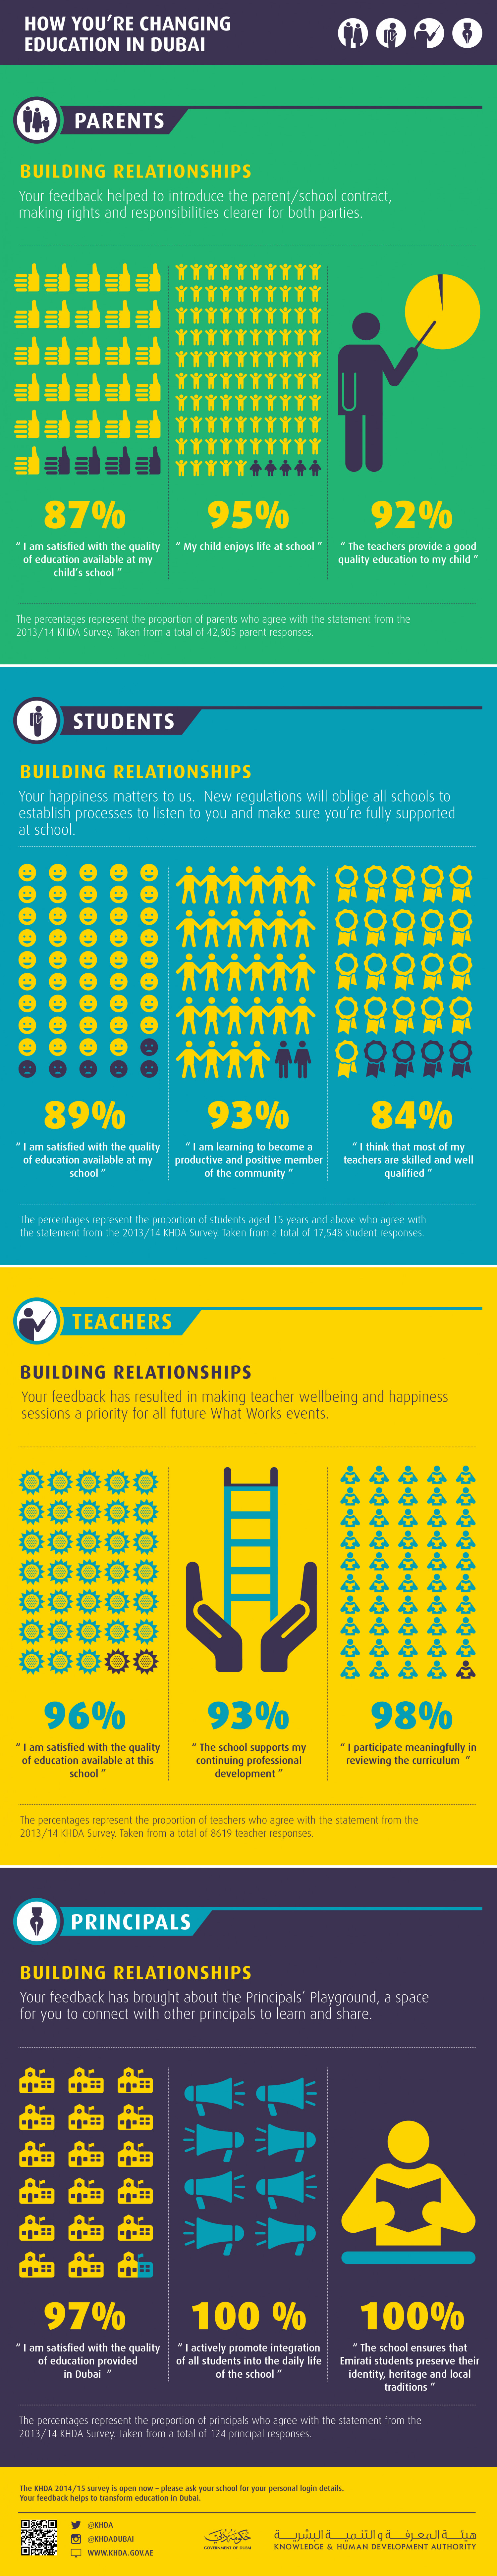 How you're changing education in Dubai Infographic